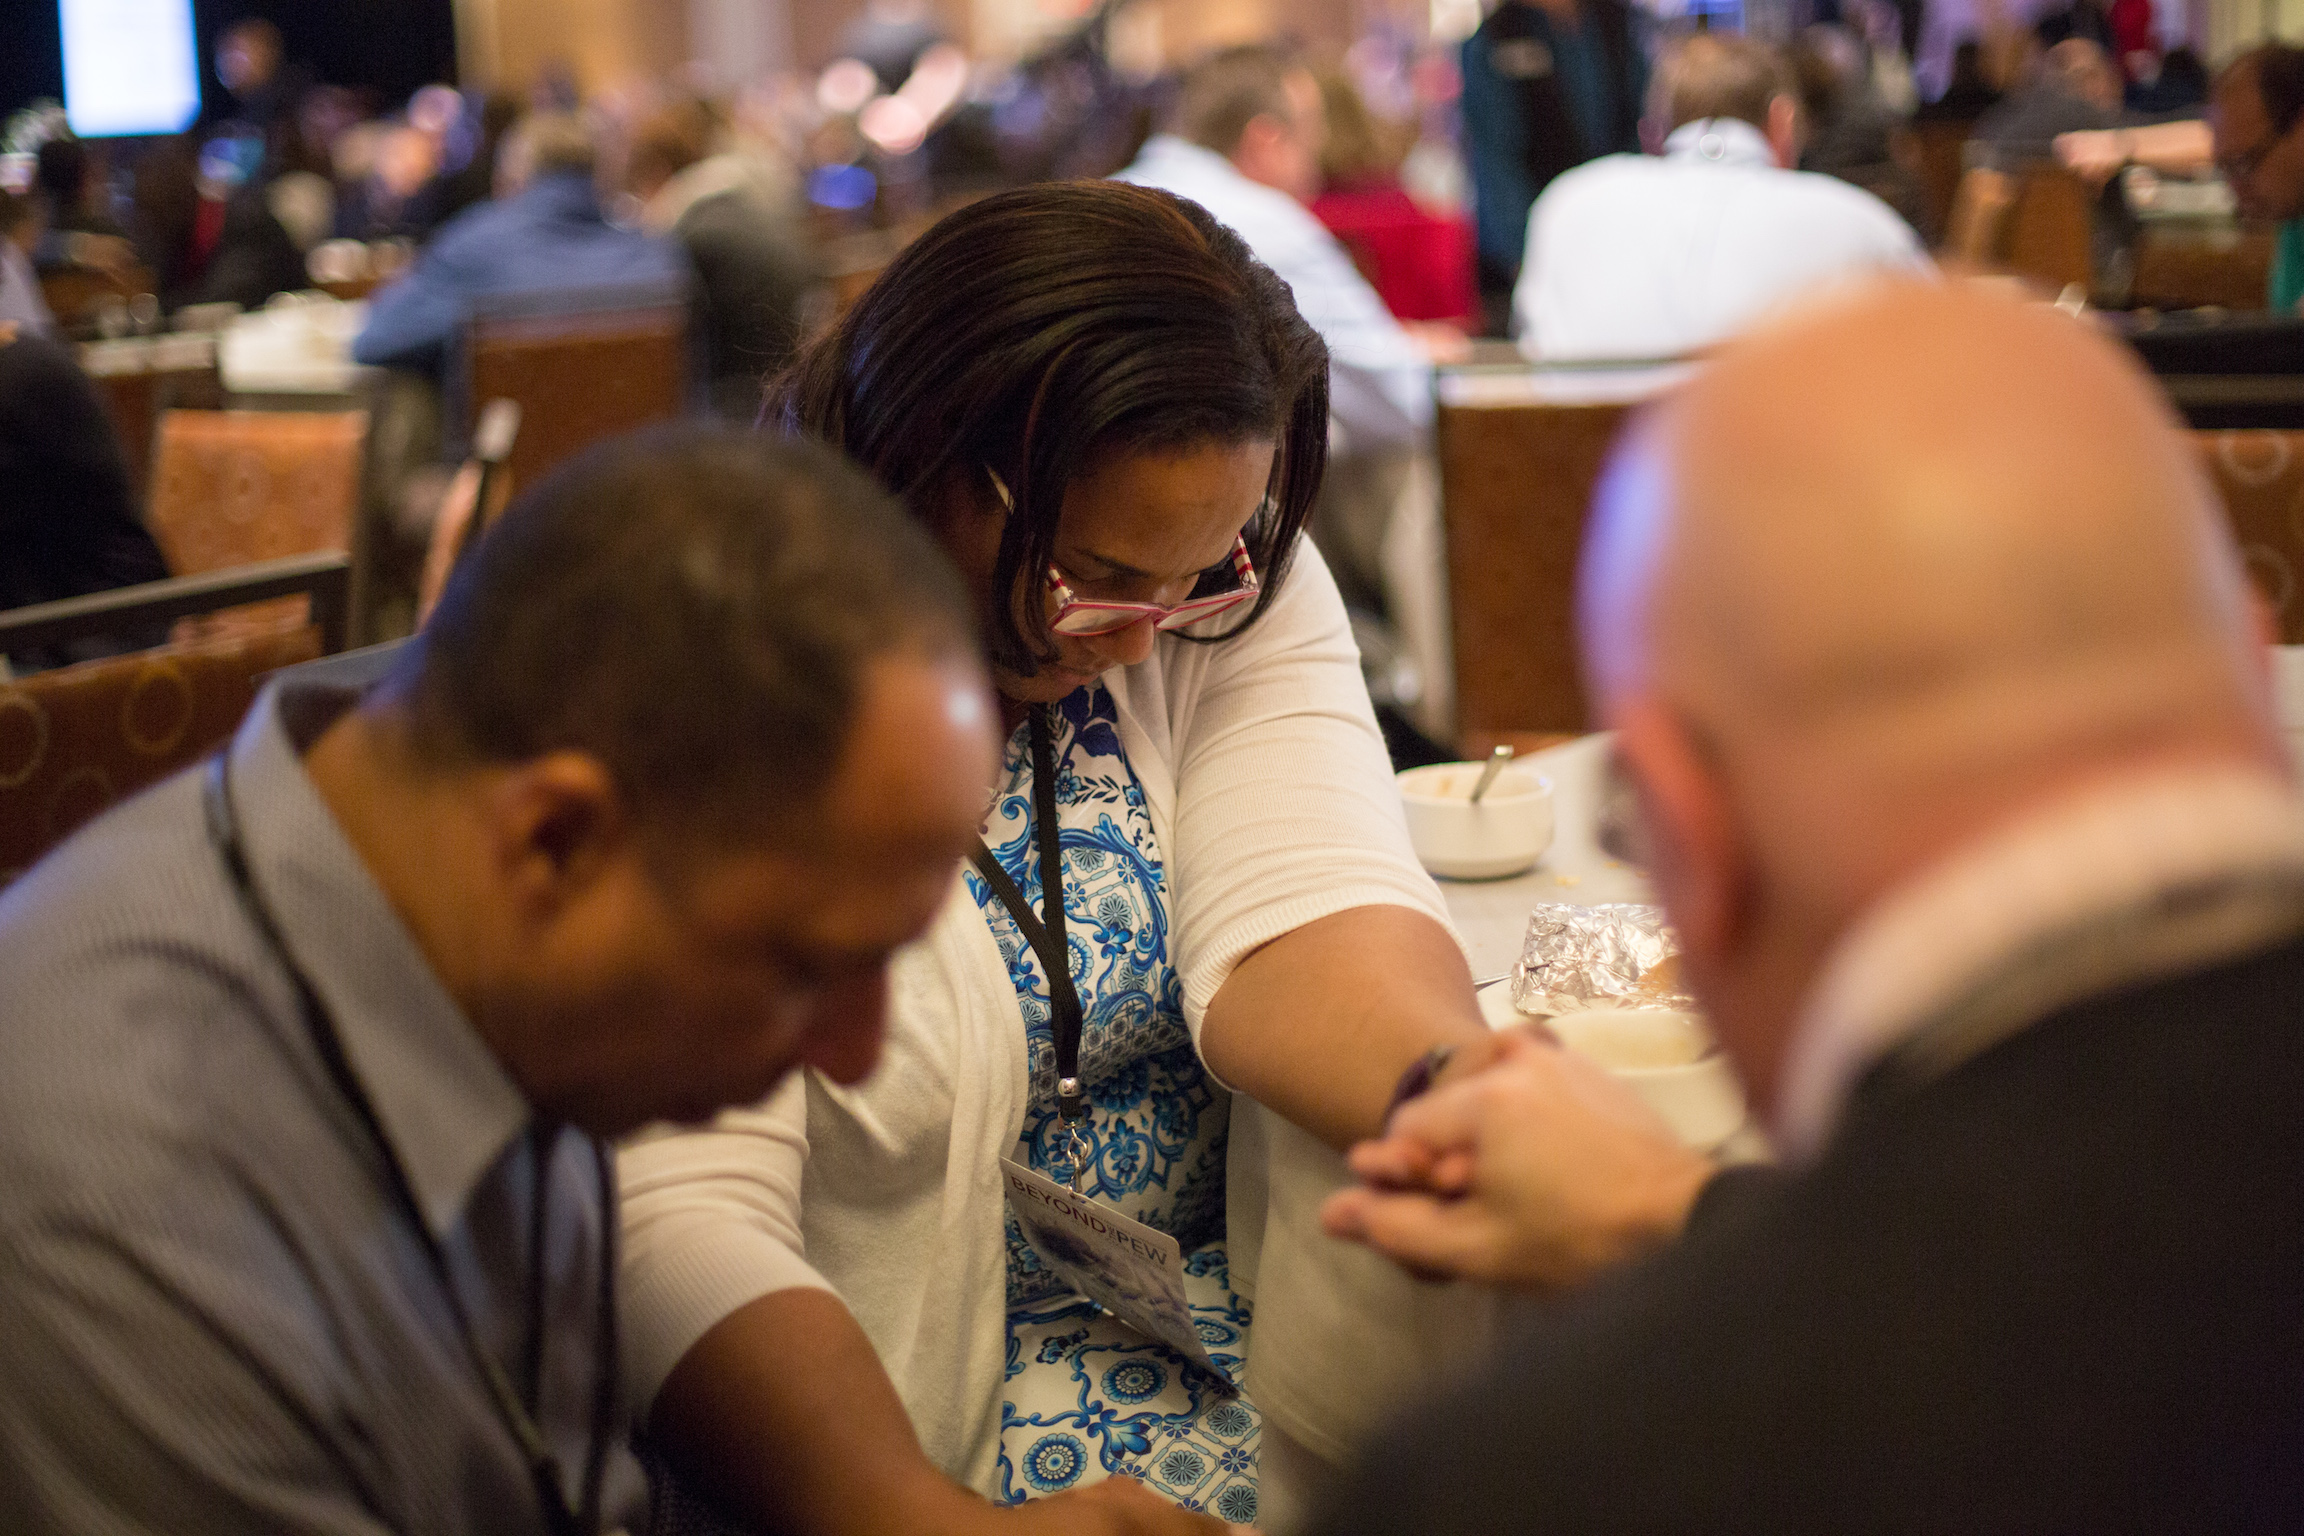 Adventist Ministries Convention attendees pause for prayer during morning devotional. Photo: Pieter Damsteegt